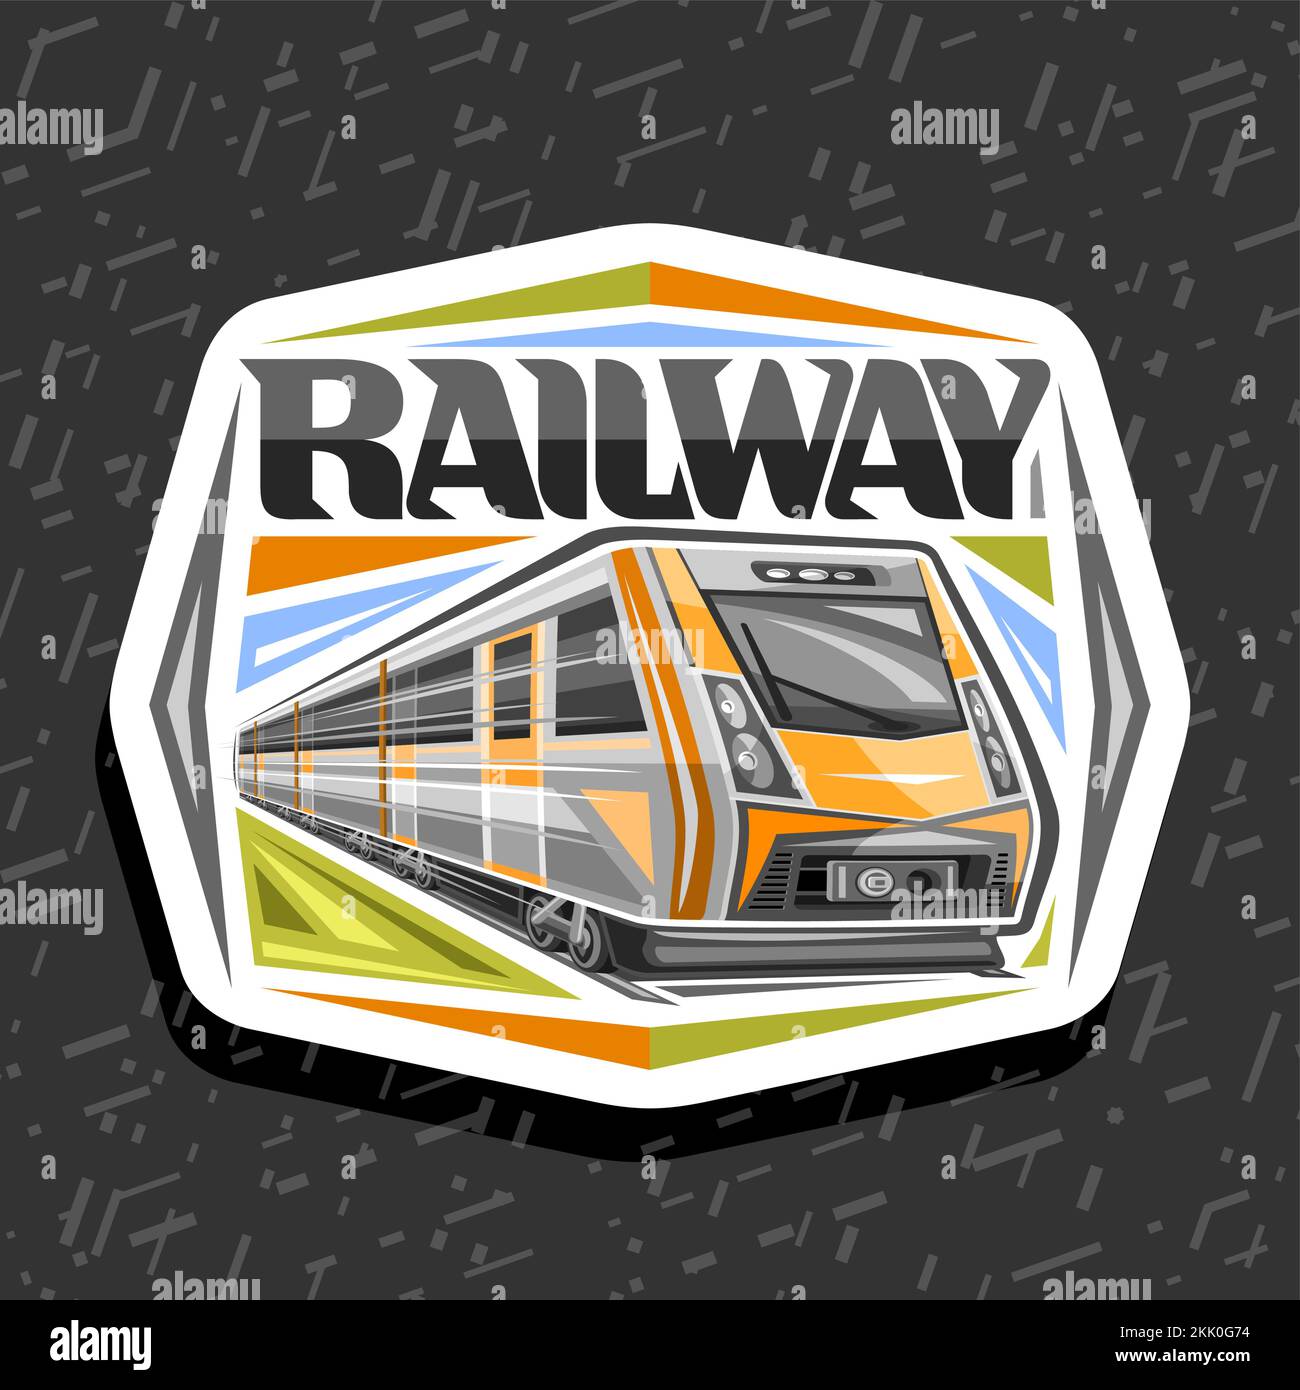 Vector logo for Railway, white decorative sign board with illustration of orange train rushing by railway, industrial label with unique brush letterin Stock Vector